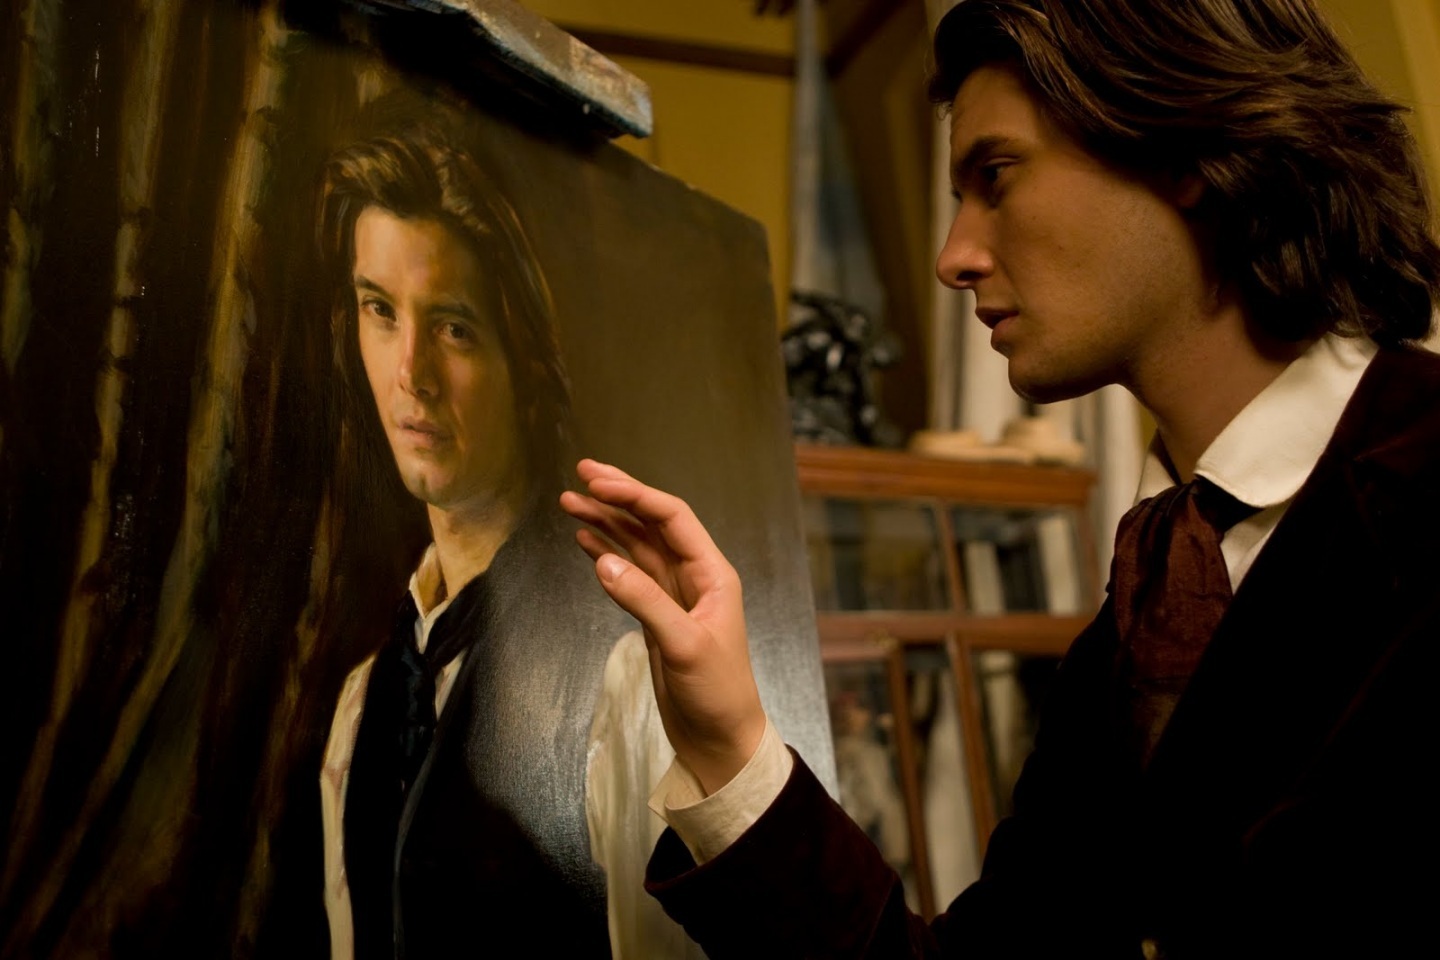 The Picture Of Dorian Gray Backgrounds, Compatible - PC, Mobile, Gadgets| 1440x960 px